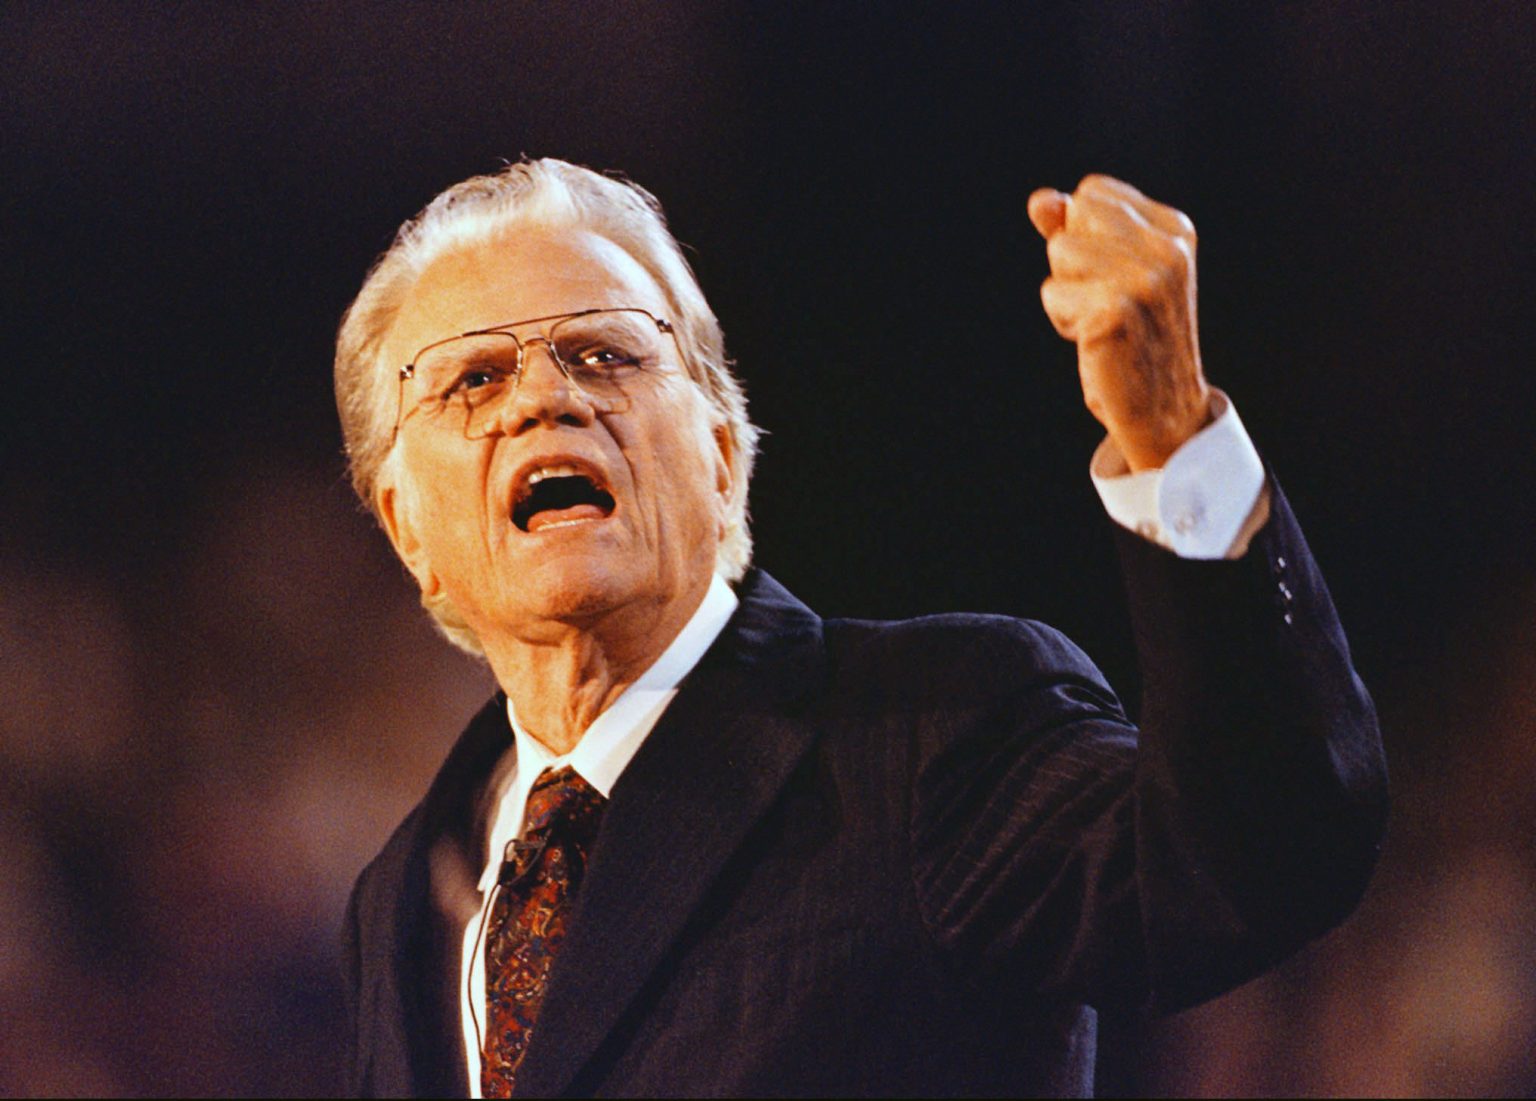 DOWNLOAD MP3: When the Chips are Down by Evangelist BILLY GRAHAM (Sermon) 1